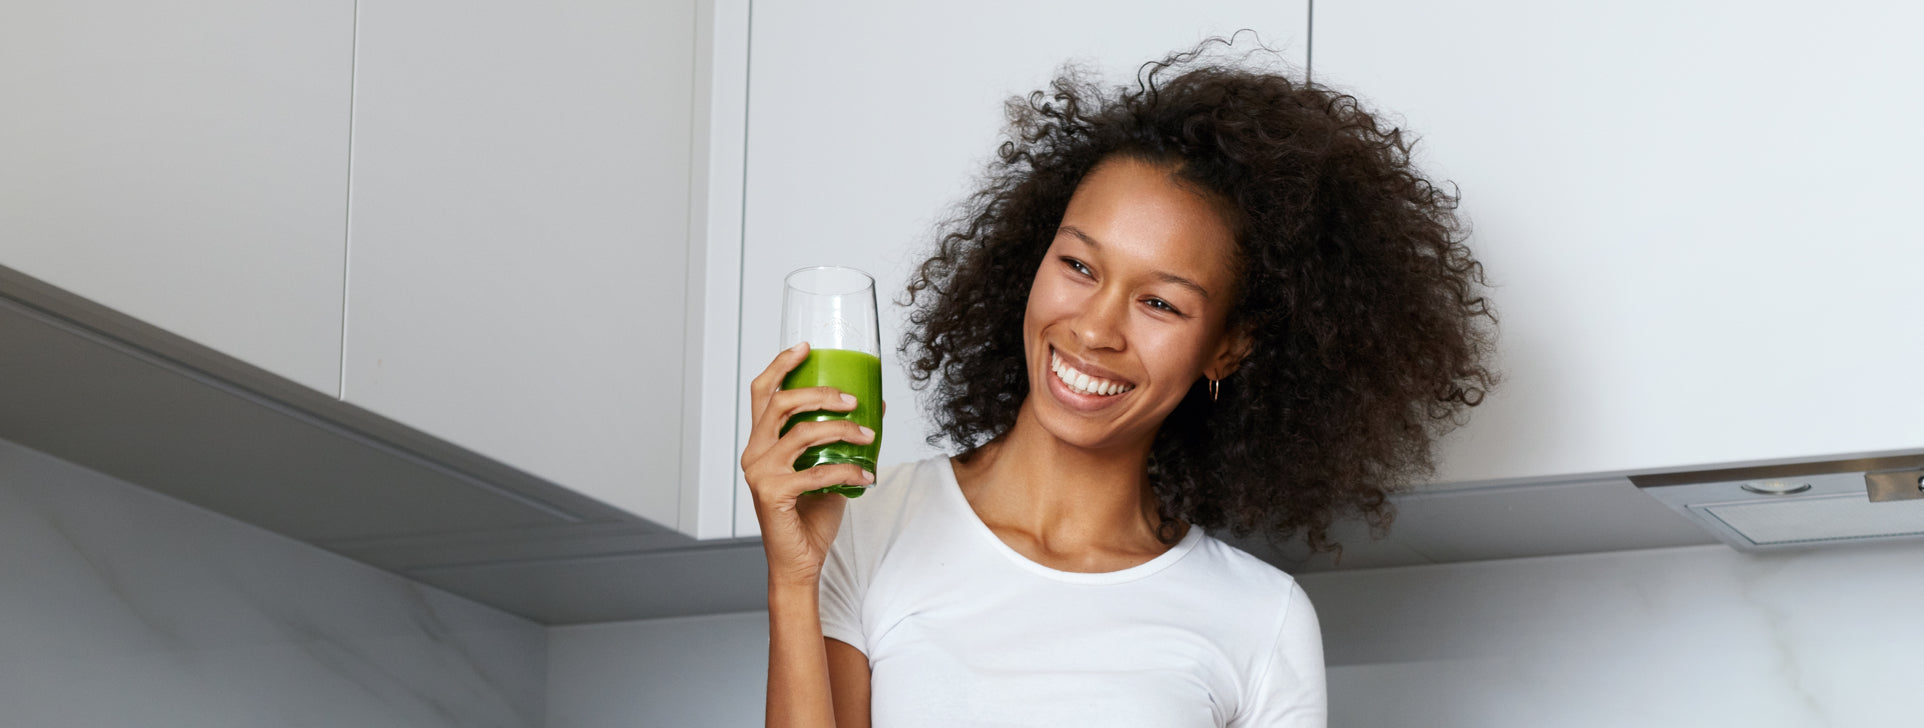 An African American woman looks at her healthy looking green juice